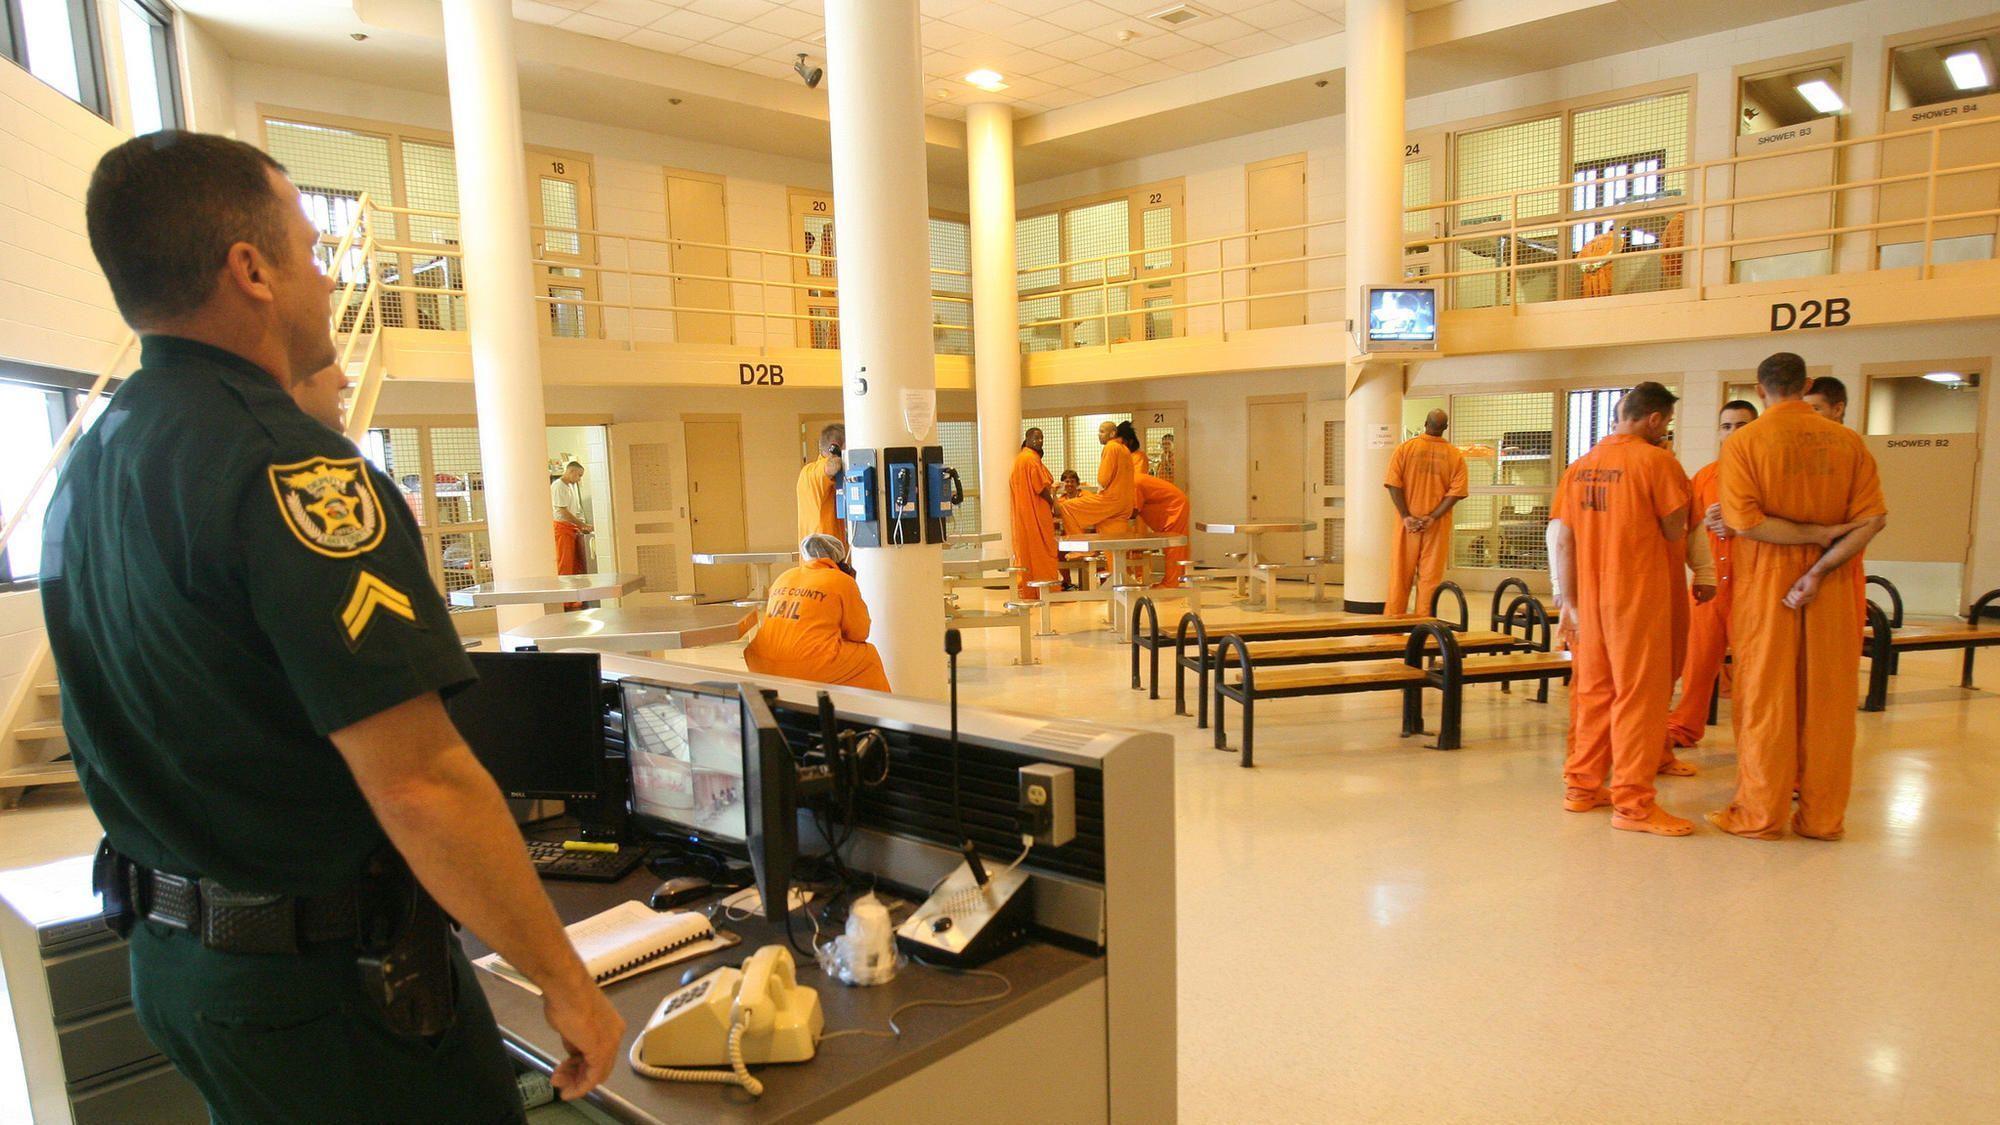 Investigation Orange County Jail guards lined up for legal help from